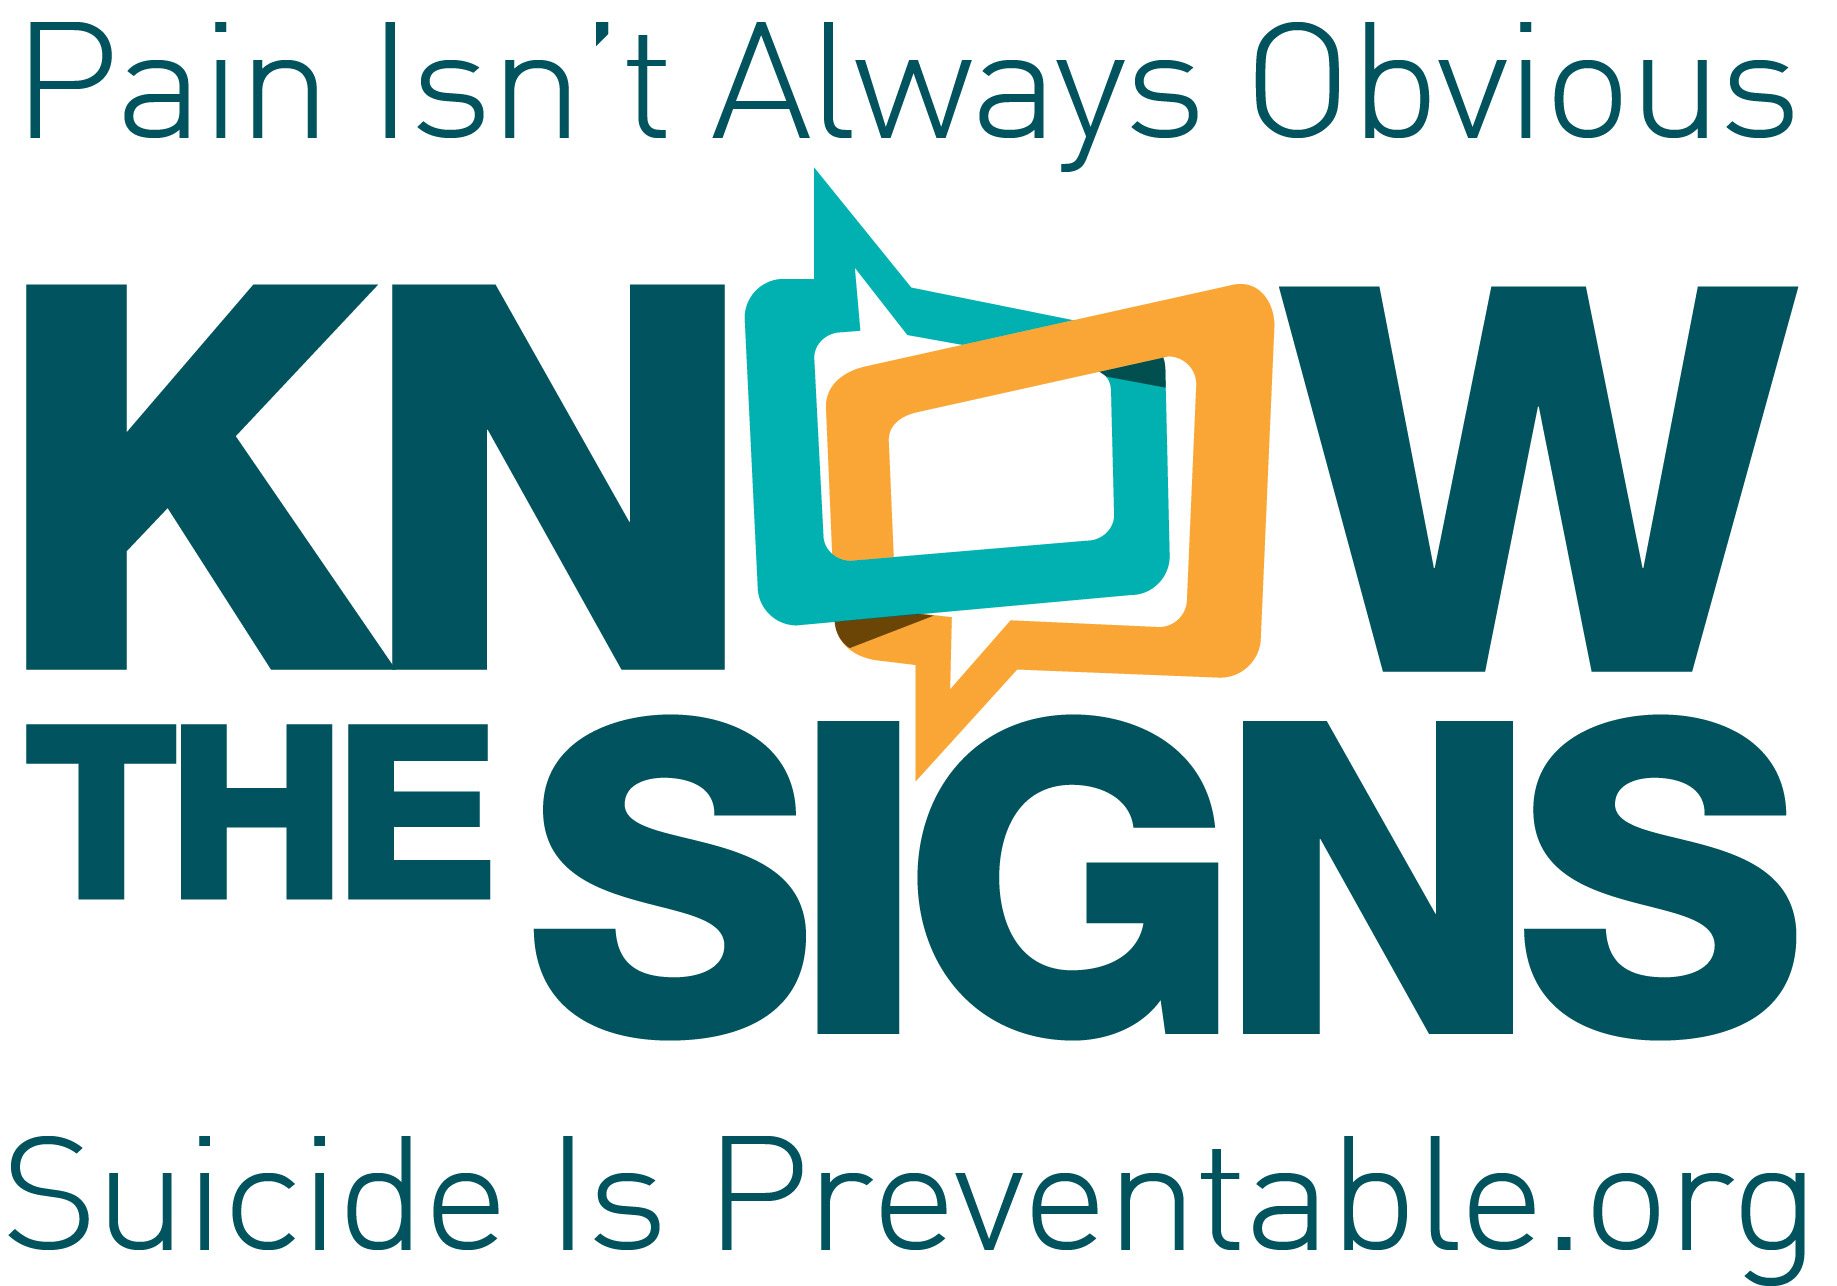 Know the Signs logo. Suicide is preventable.